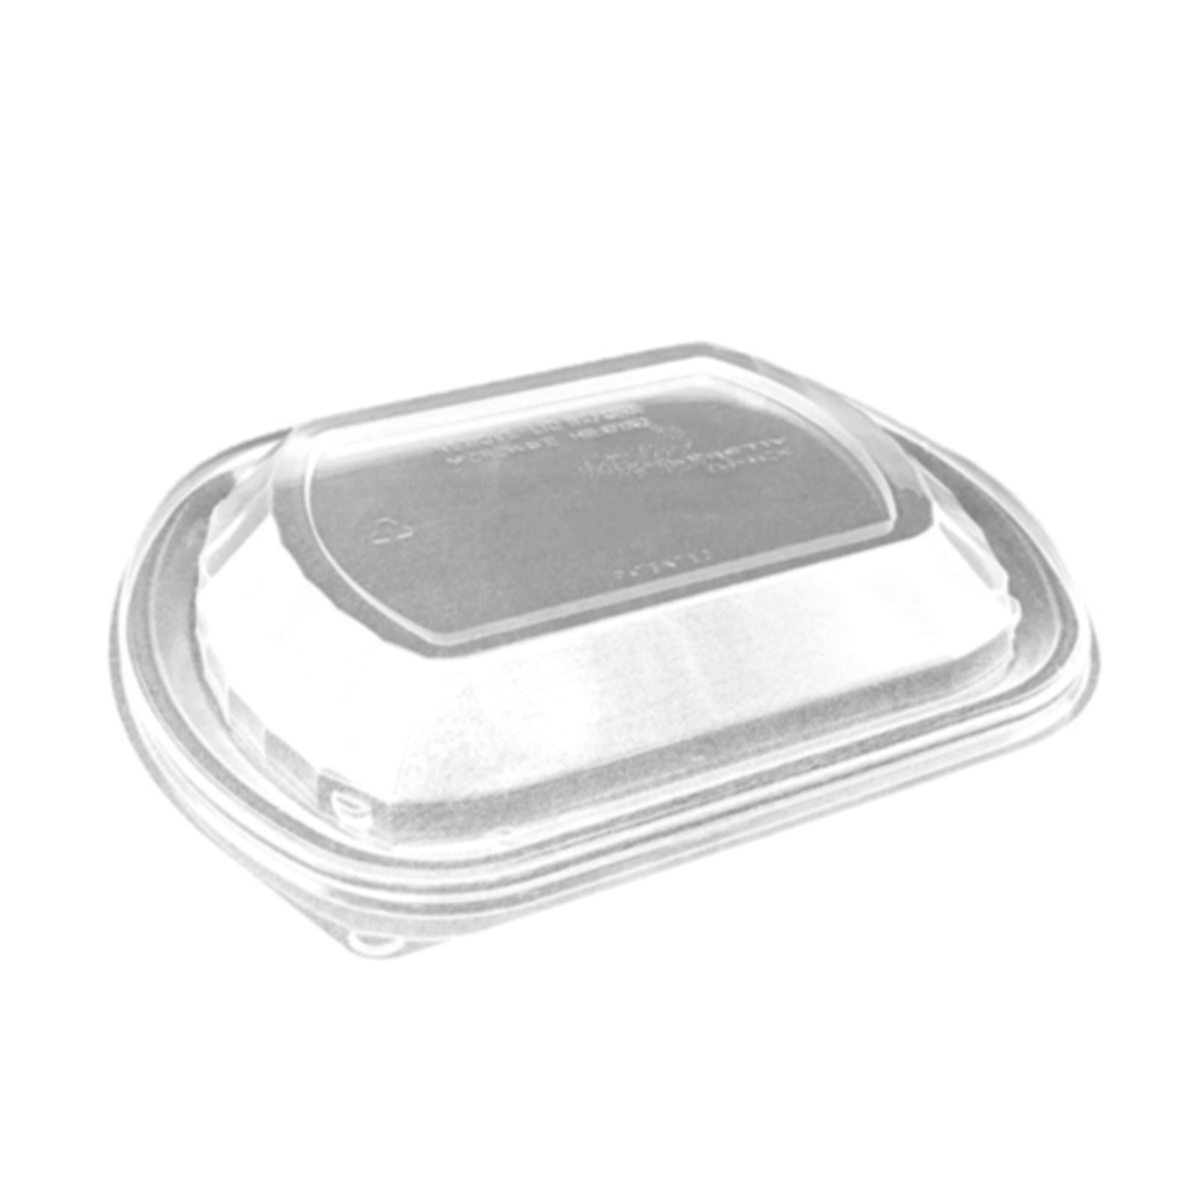 Lids for Micro Containers 20pk